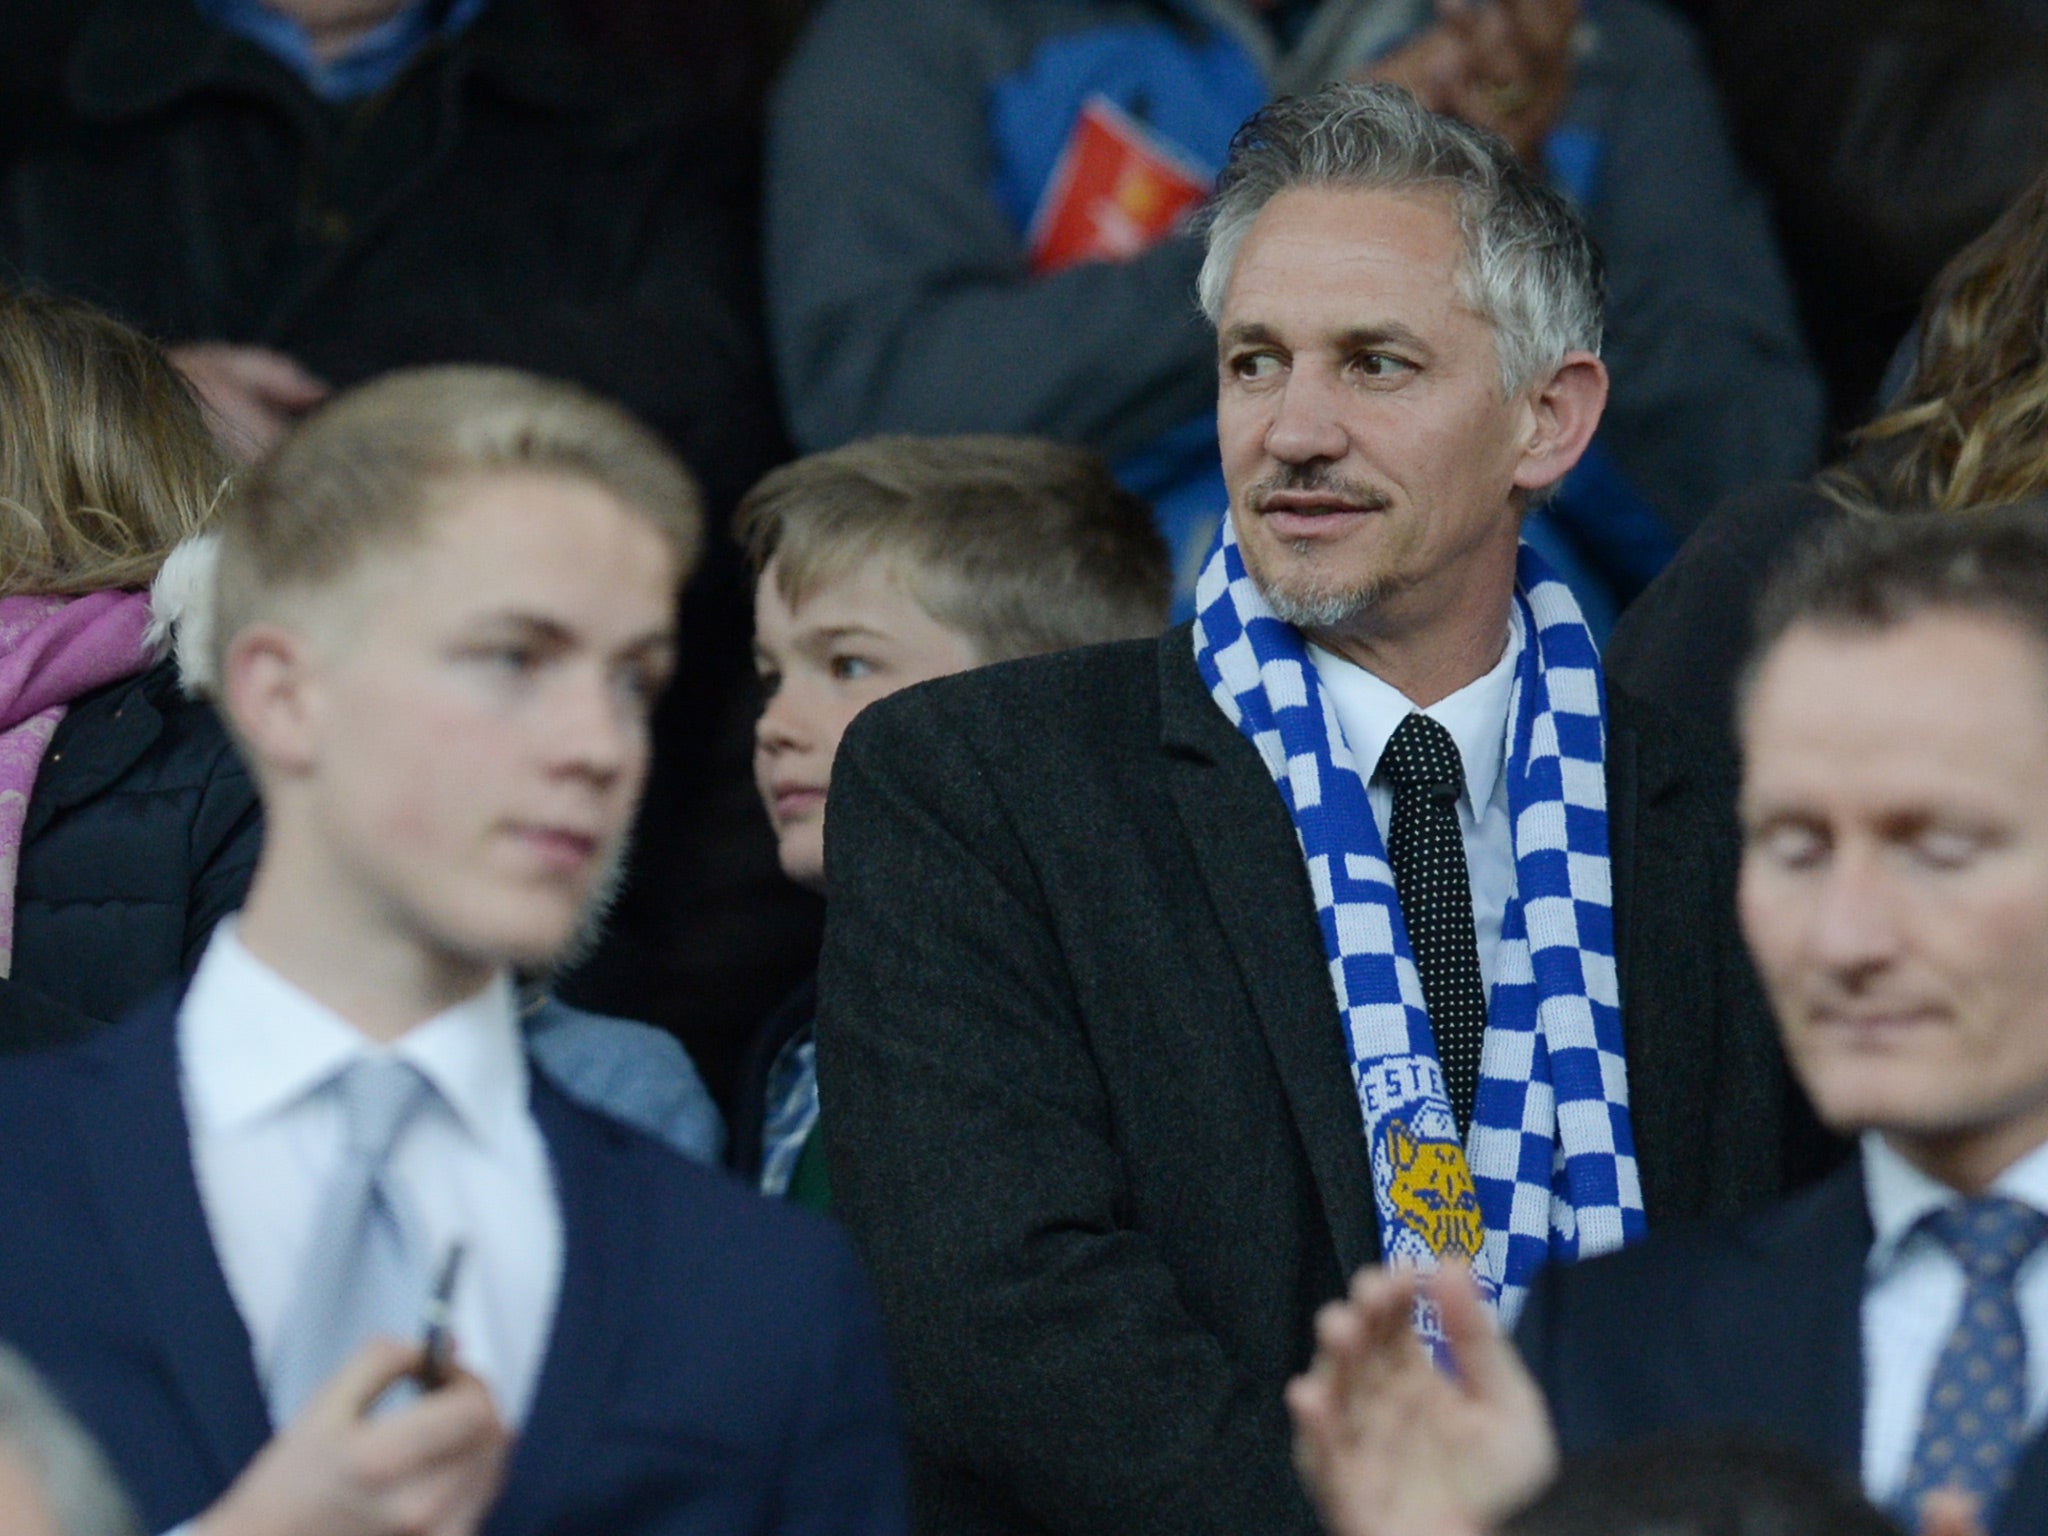 Lineker has become something of a magnet for tabloid stories